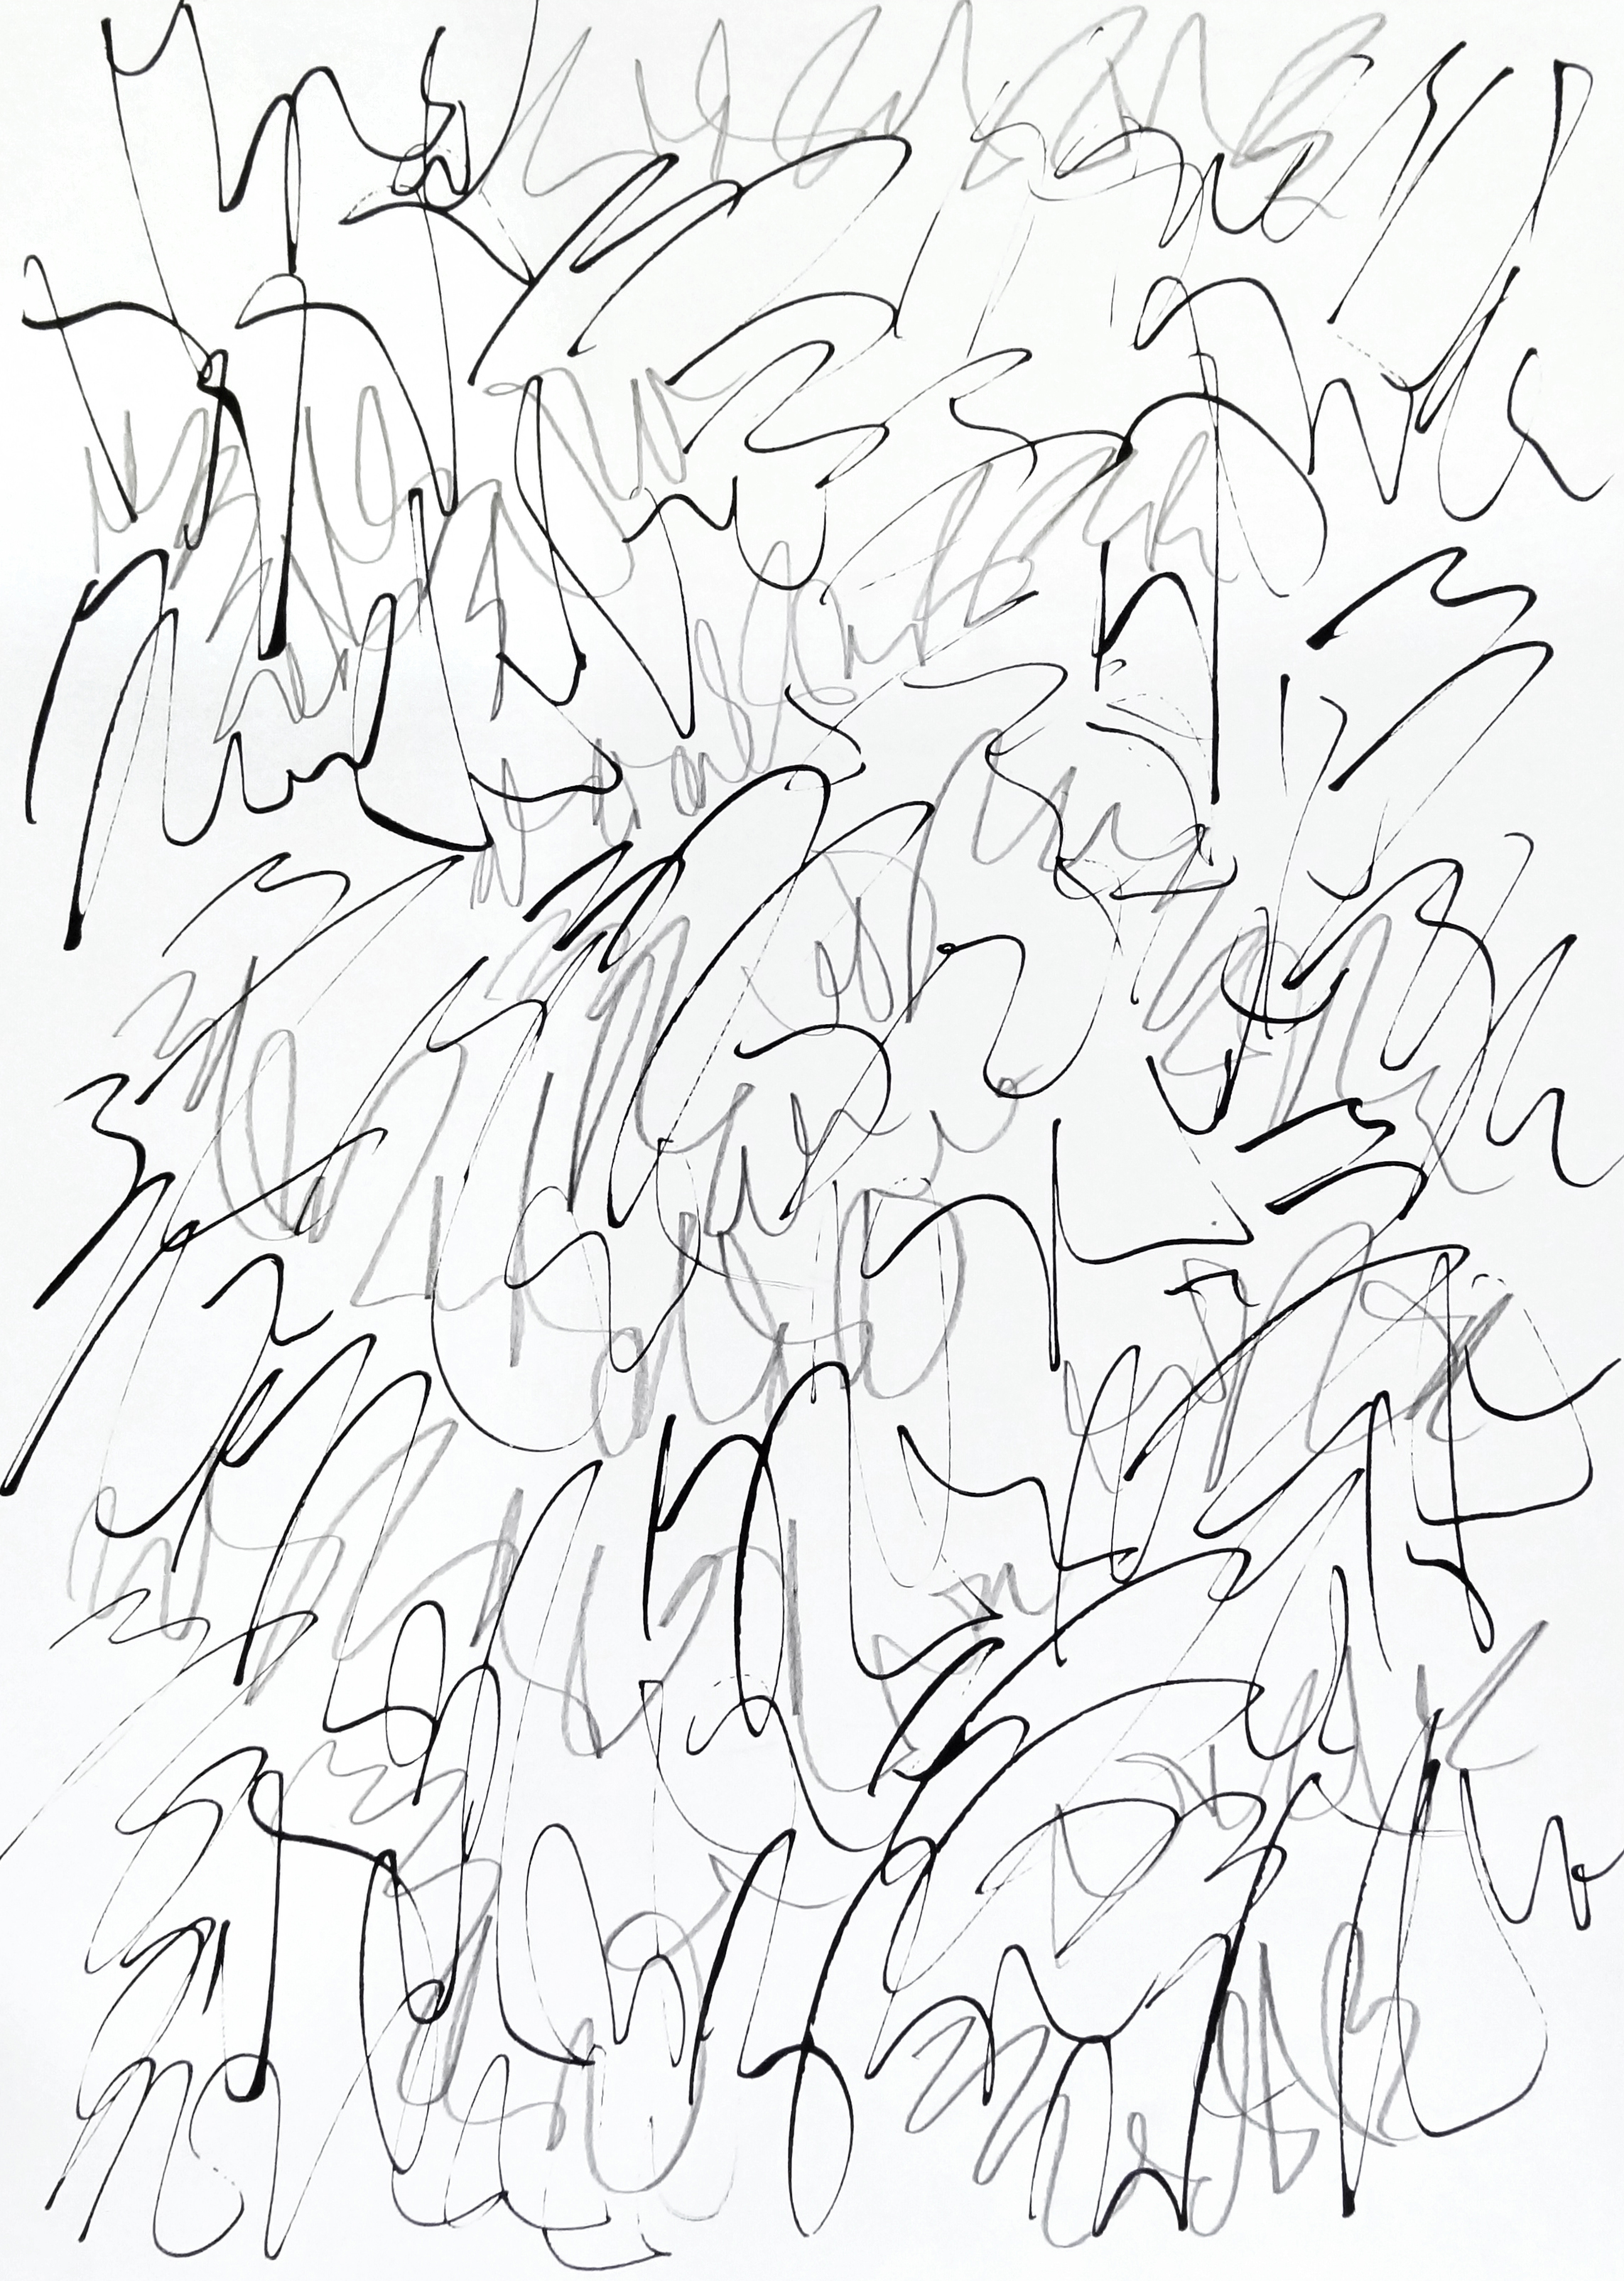  rhythm and flow studies, 2019 calligraphy ink and pencil on paper 42,0 x 29,7 cm (4-19) 